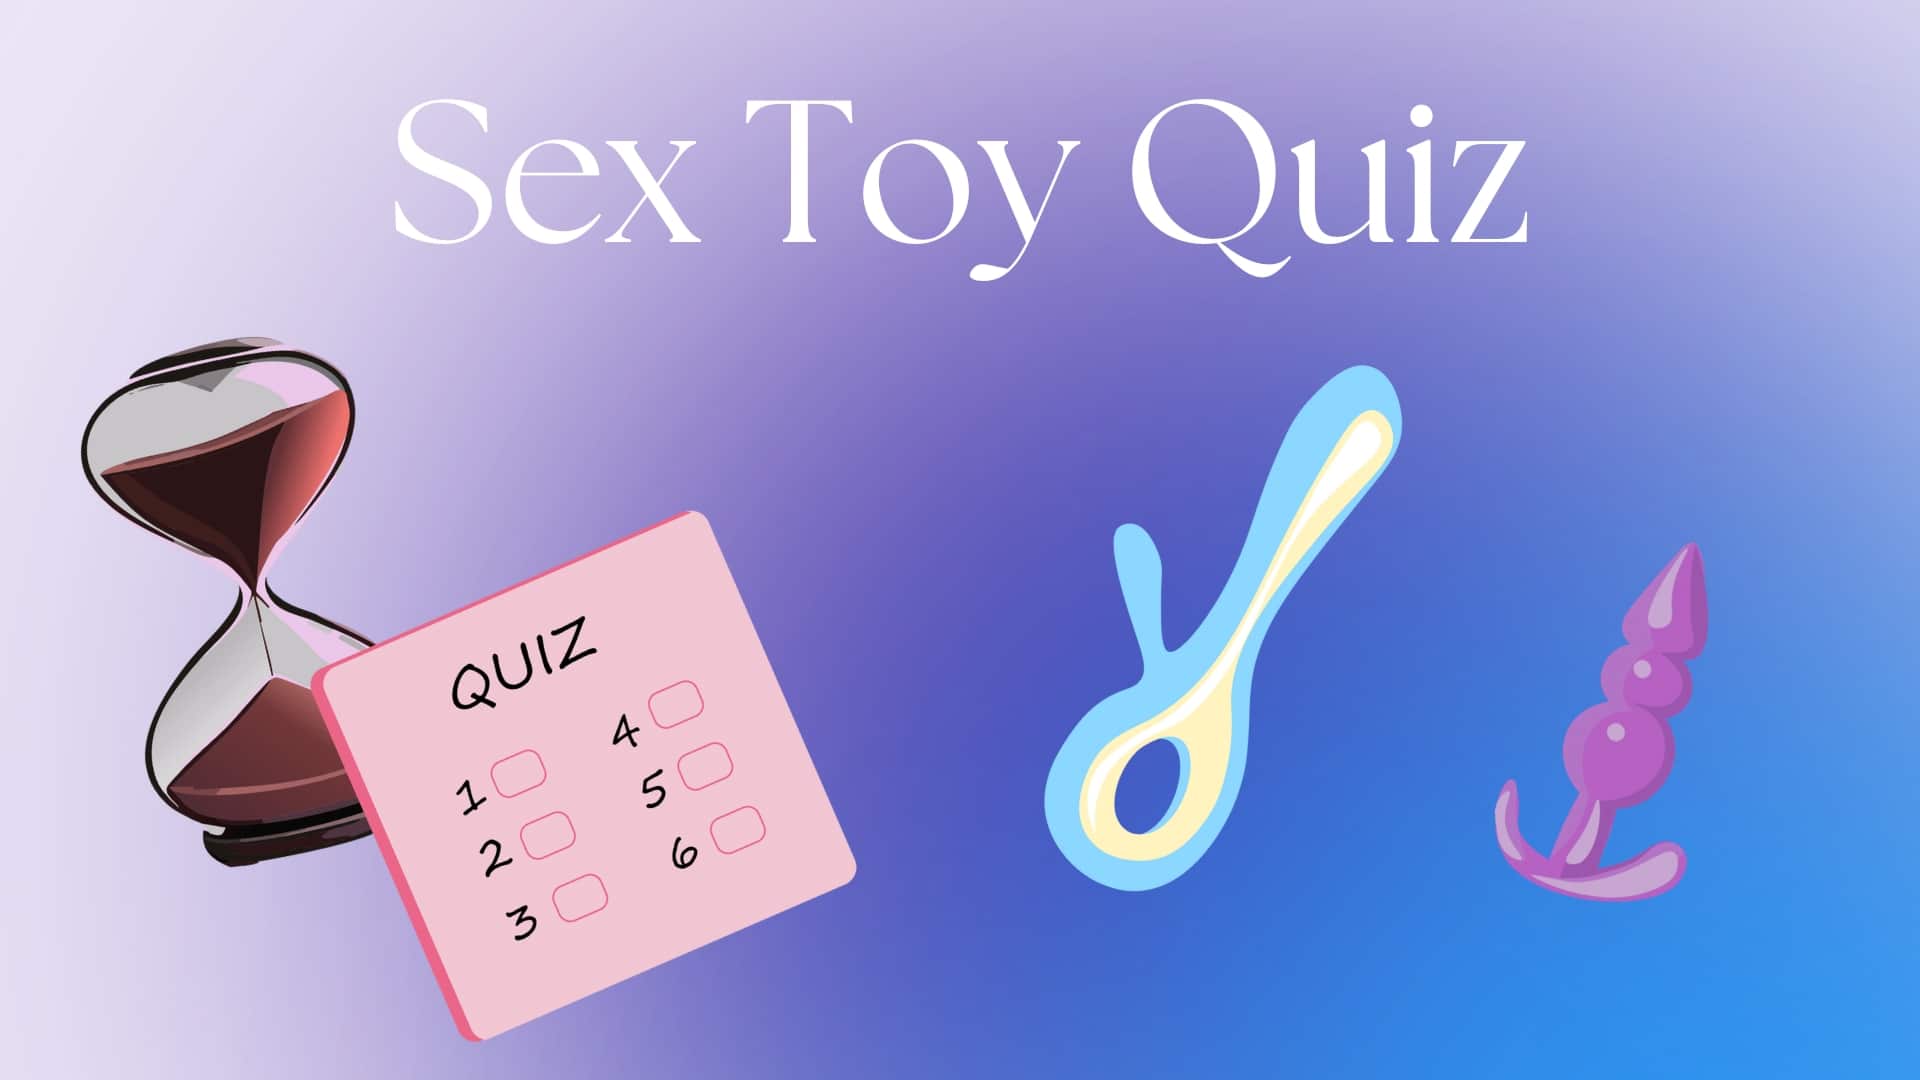 The Bedbible Sex Toy Quiz